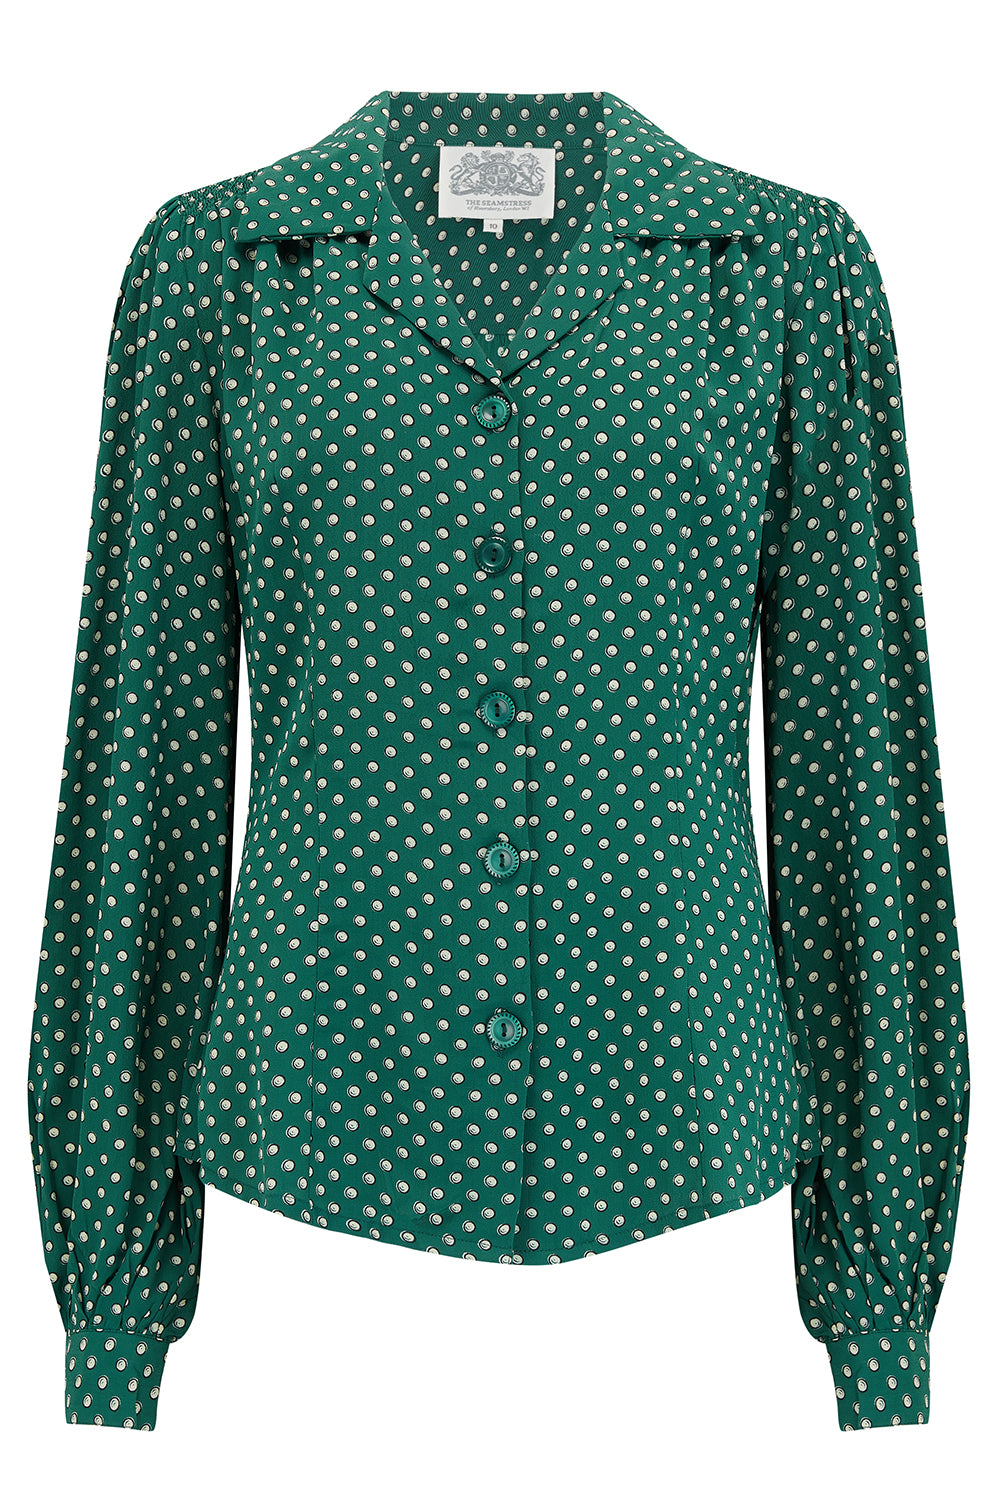 Poppy Long Sleeve Blouse in Green Ditzy Dot , Authentic & Classic 1940s Vintage Style - True and authentic vintage style clothing, inspired by the Classic styles of CC41 , WW2 and the fun 1950s RocknRoll era, for everyday wear plus events like Goodwood Revival, Twinwood Festival and Viva Las Vegas Rockabilly Weekend Rock n Romance The Seamstress Of Bloomsbury